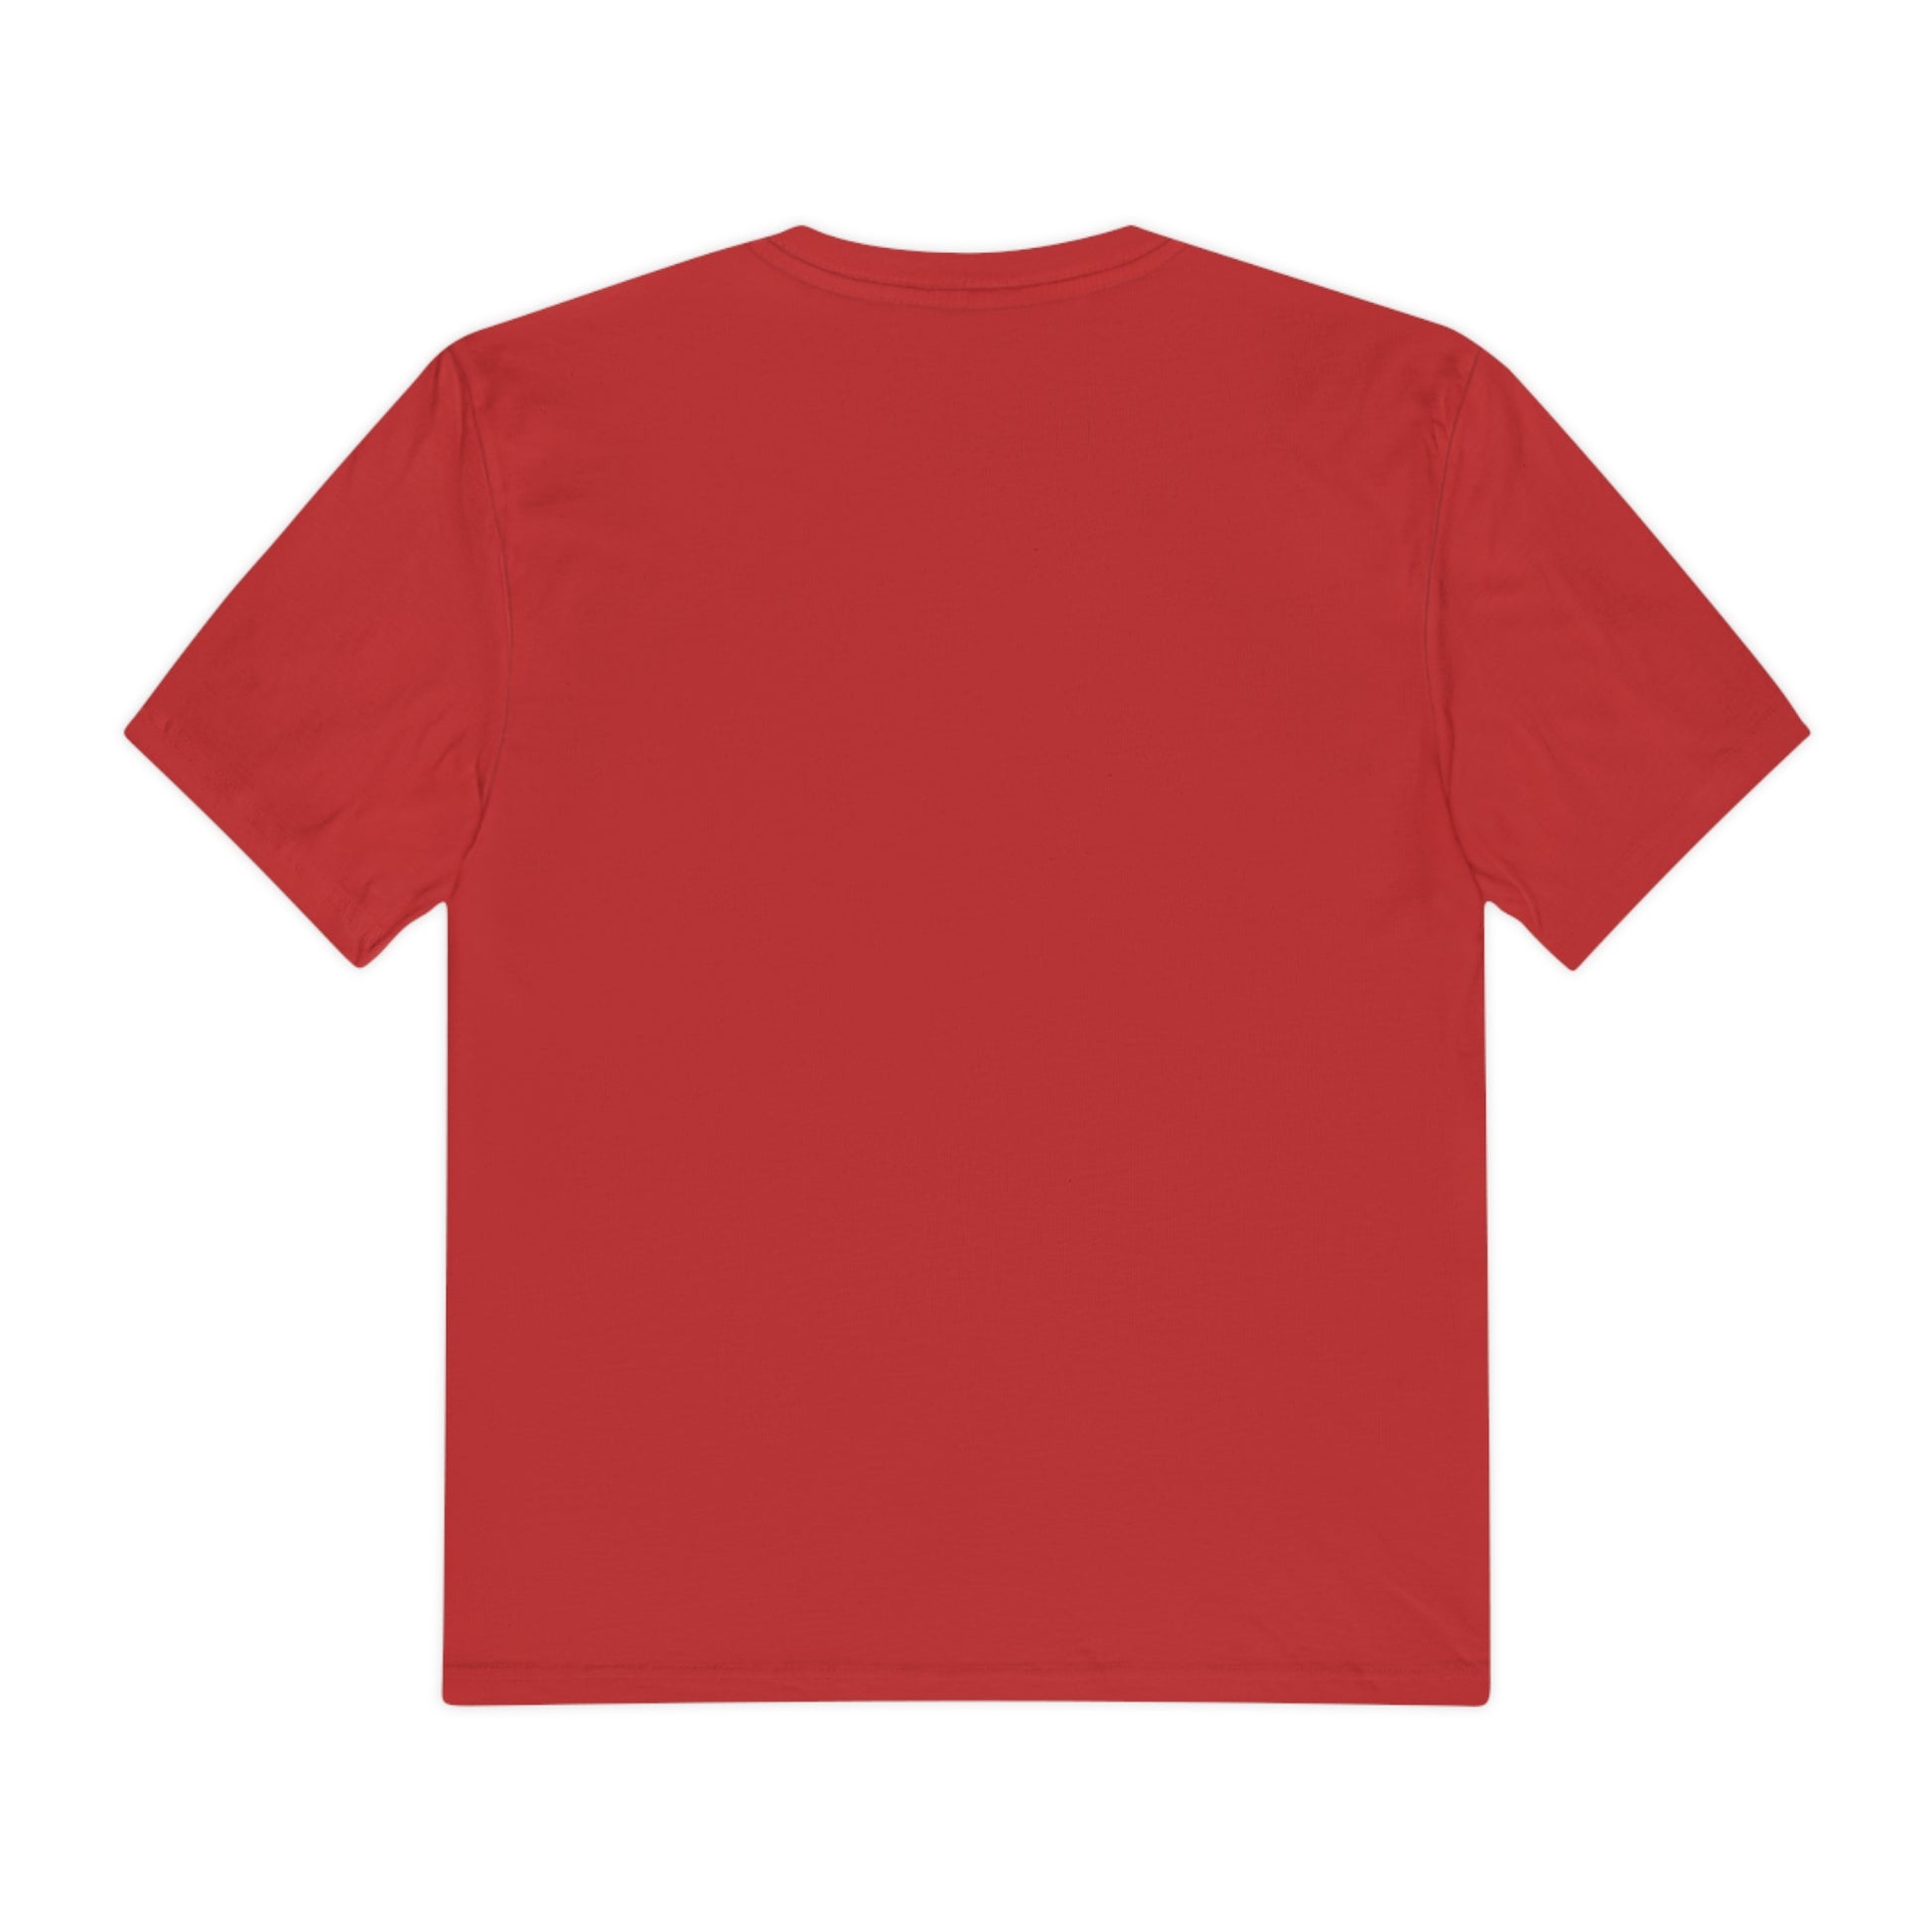 Red printed oversized Tshirt for men - Cozy Soul